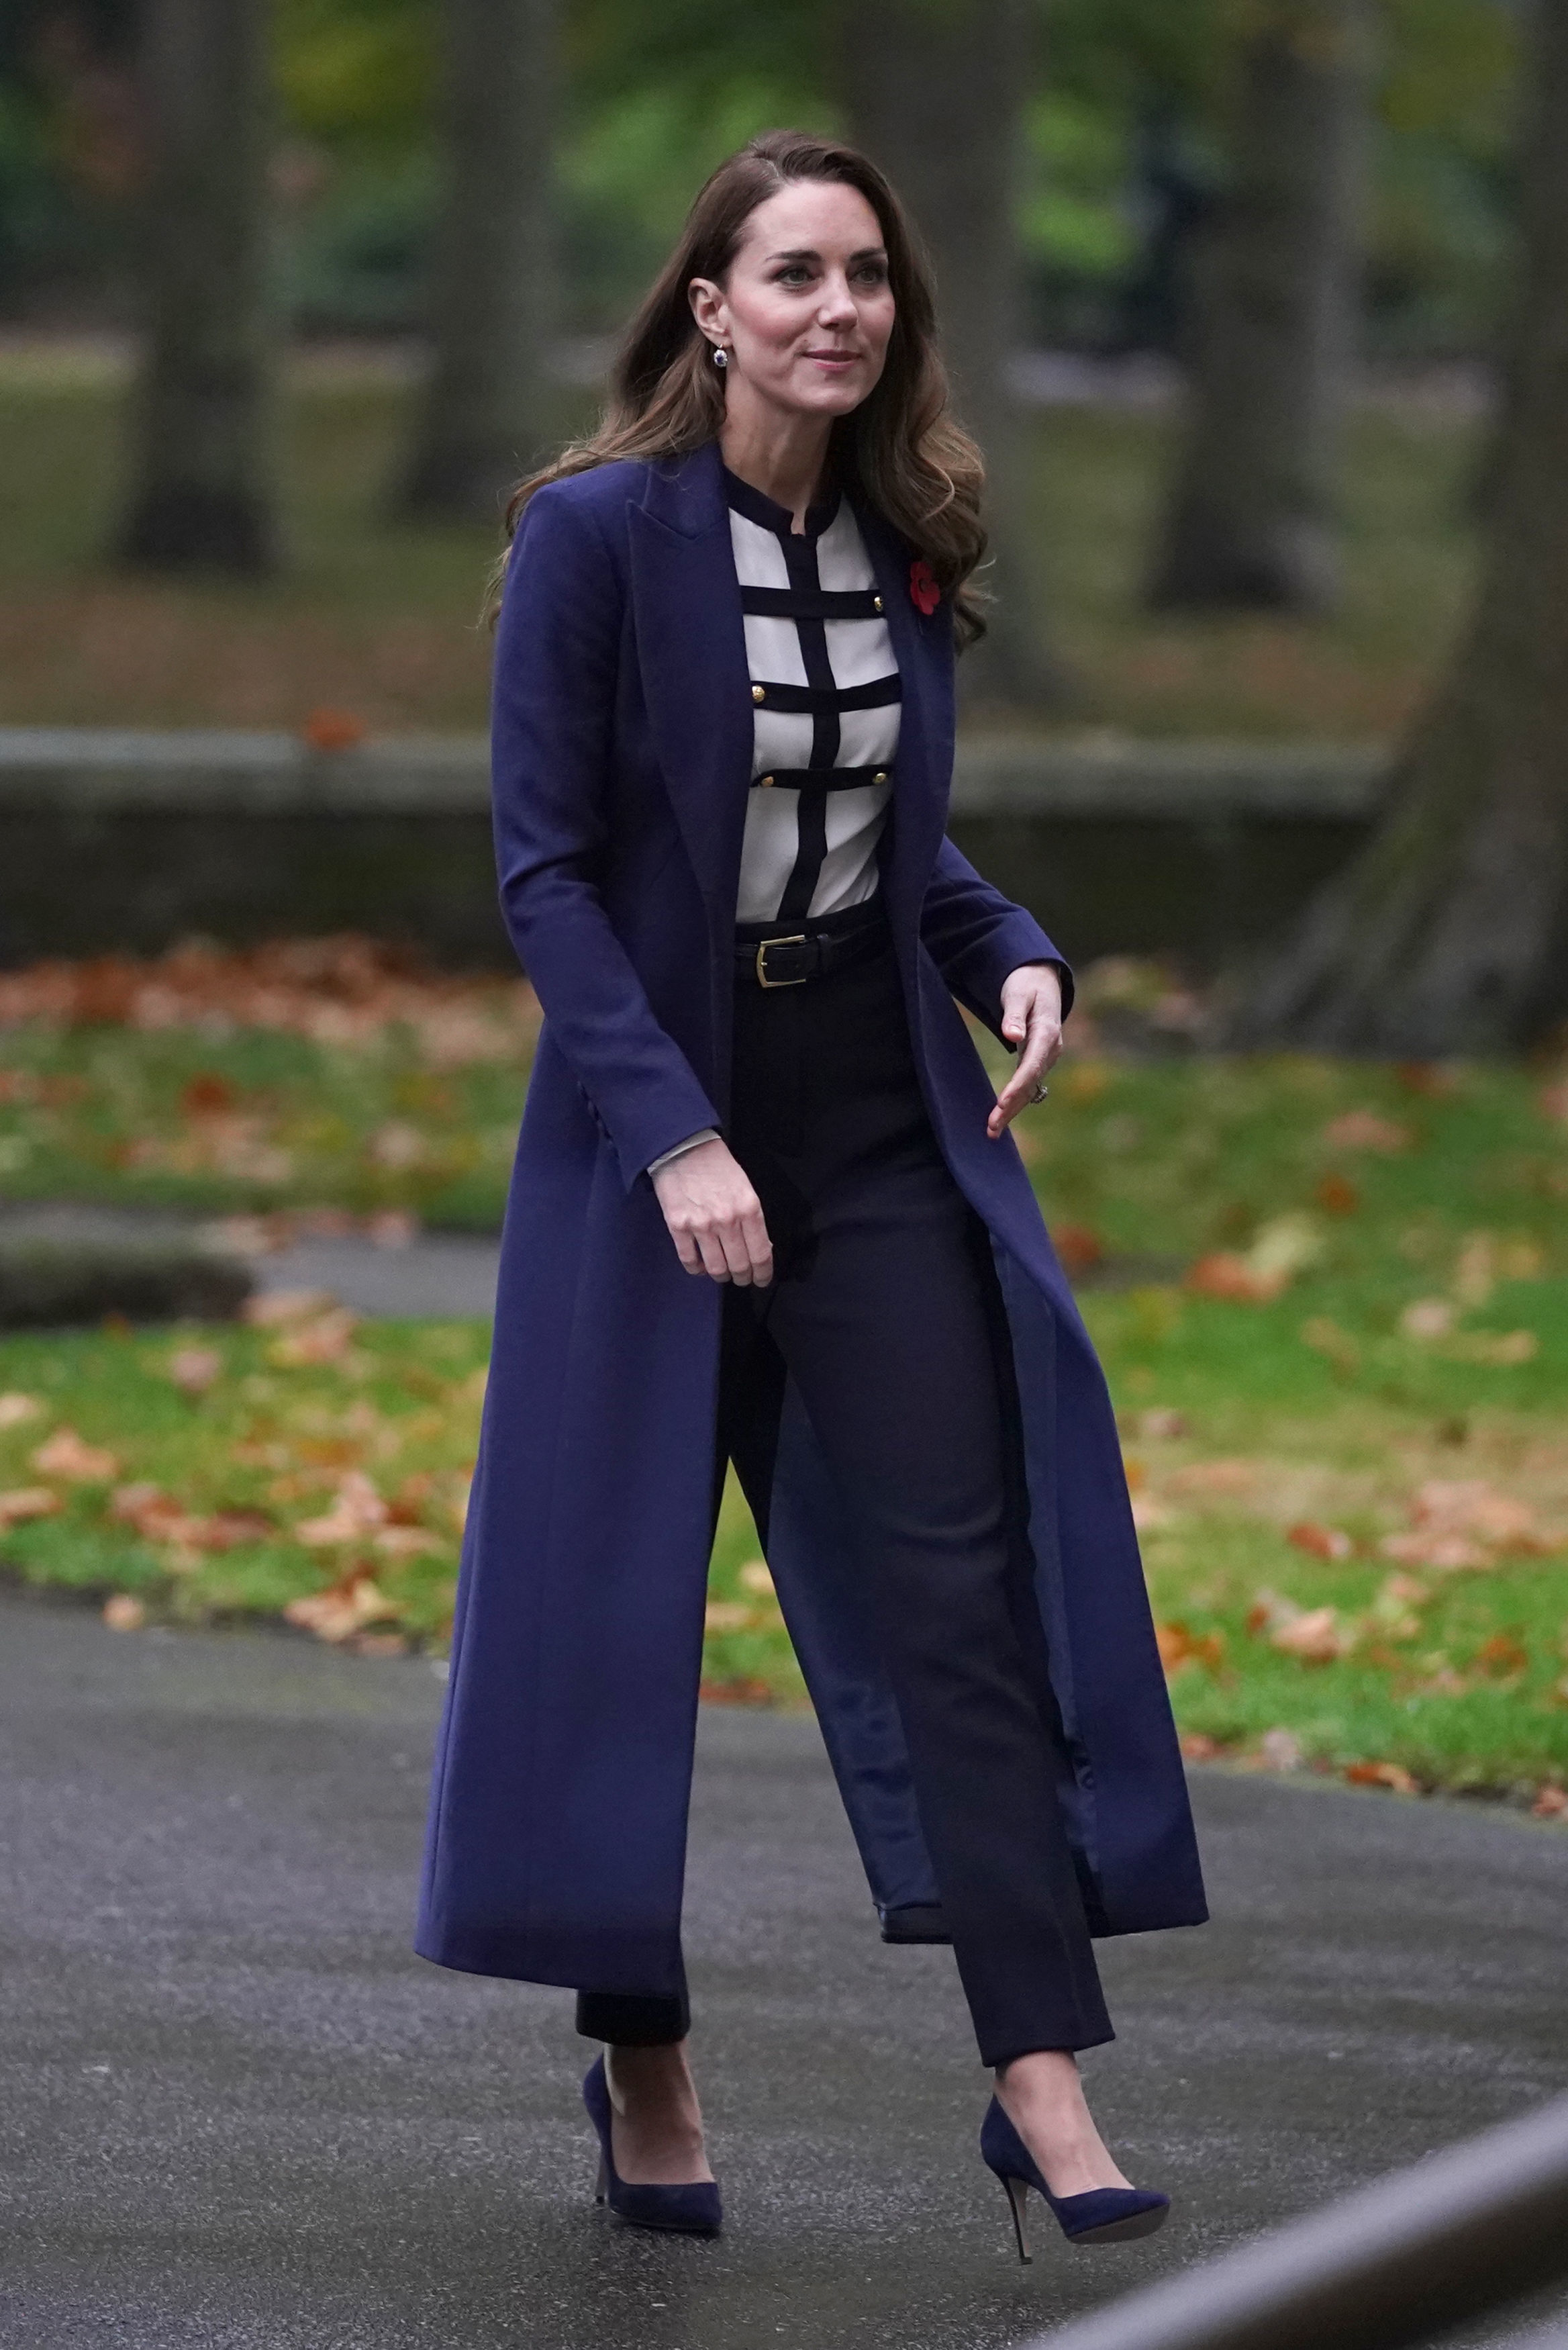 Kate arriving at the Imperial War Museum in London 